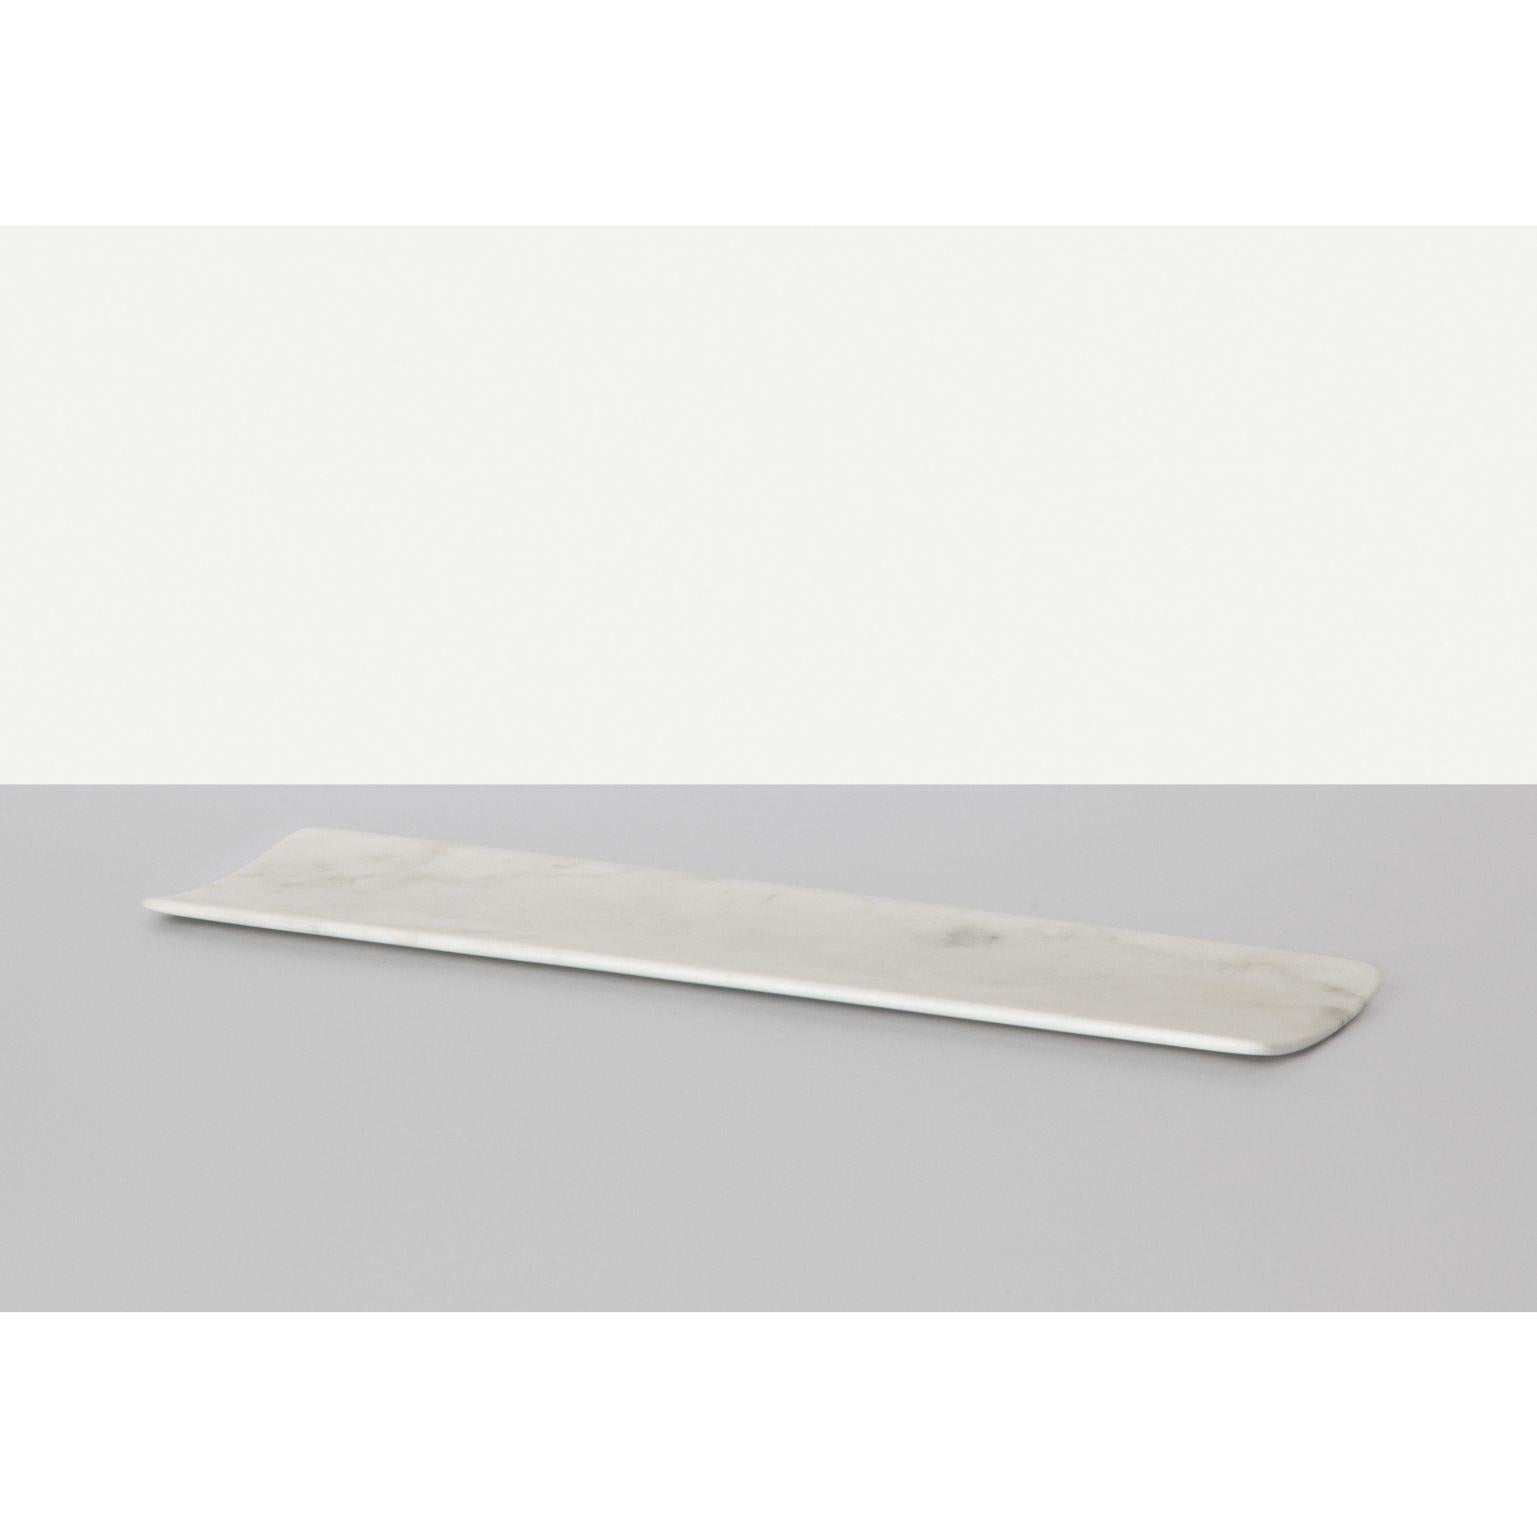 Curvati medium tray by Studioformart
Total Marble Collection
Dimensions: 40 x 10 x 2 cm
Materials: Bianco Carrara 

The history of marble carving is lost in time; in one breath, it takes us back to the IV century BC, to ancient Greece where